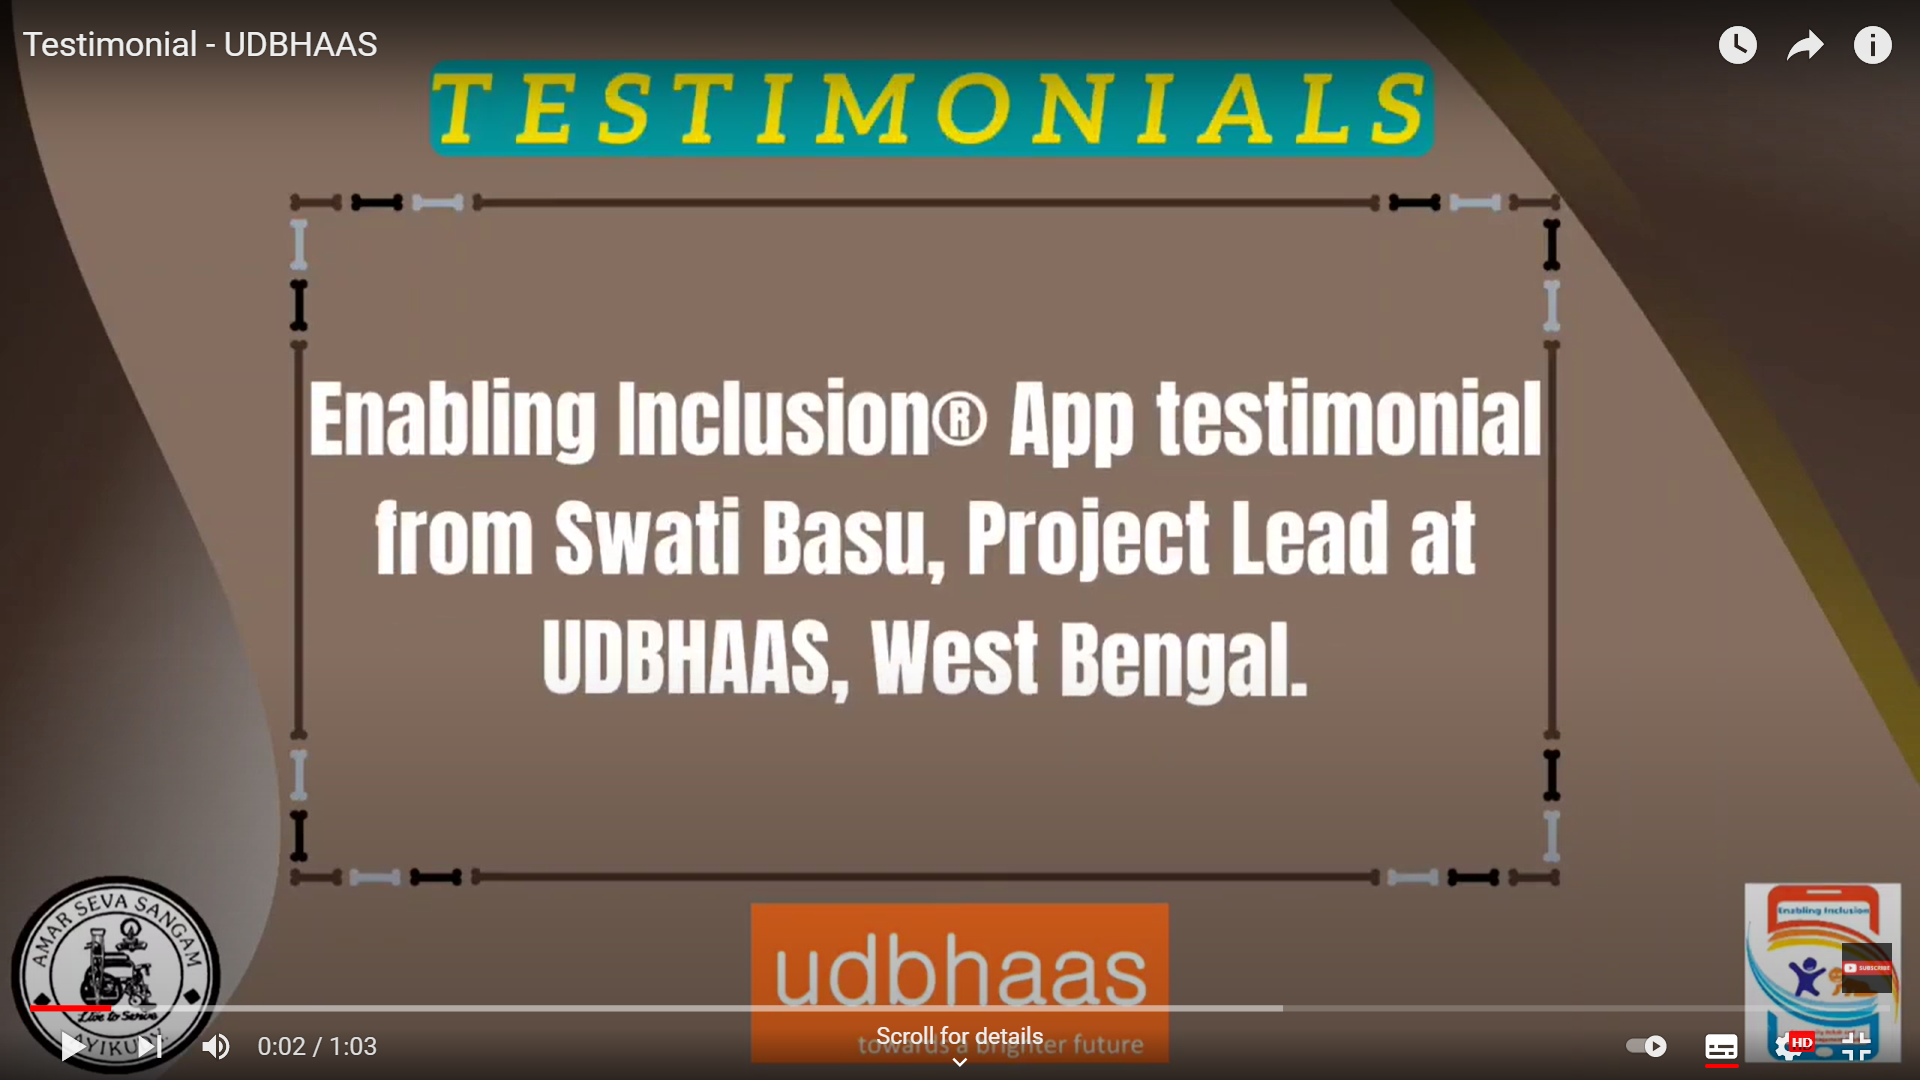 Project Lead, Udbhaas